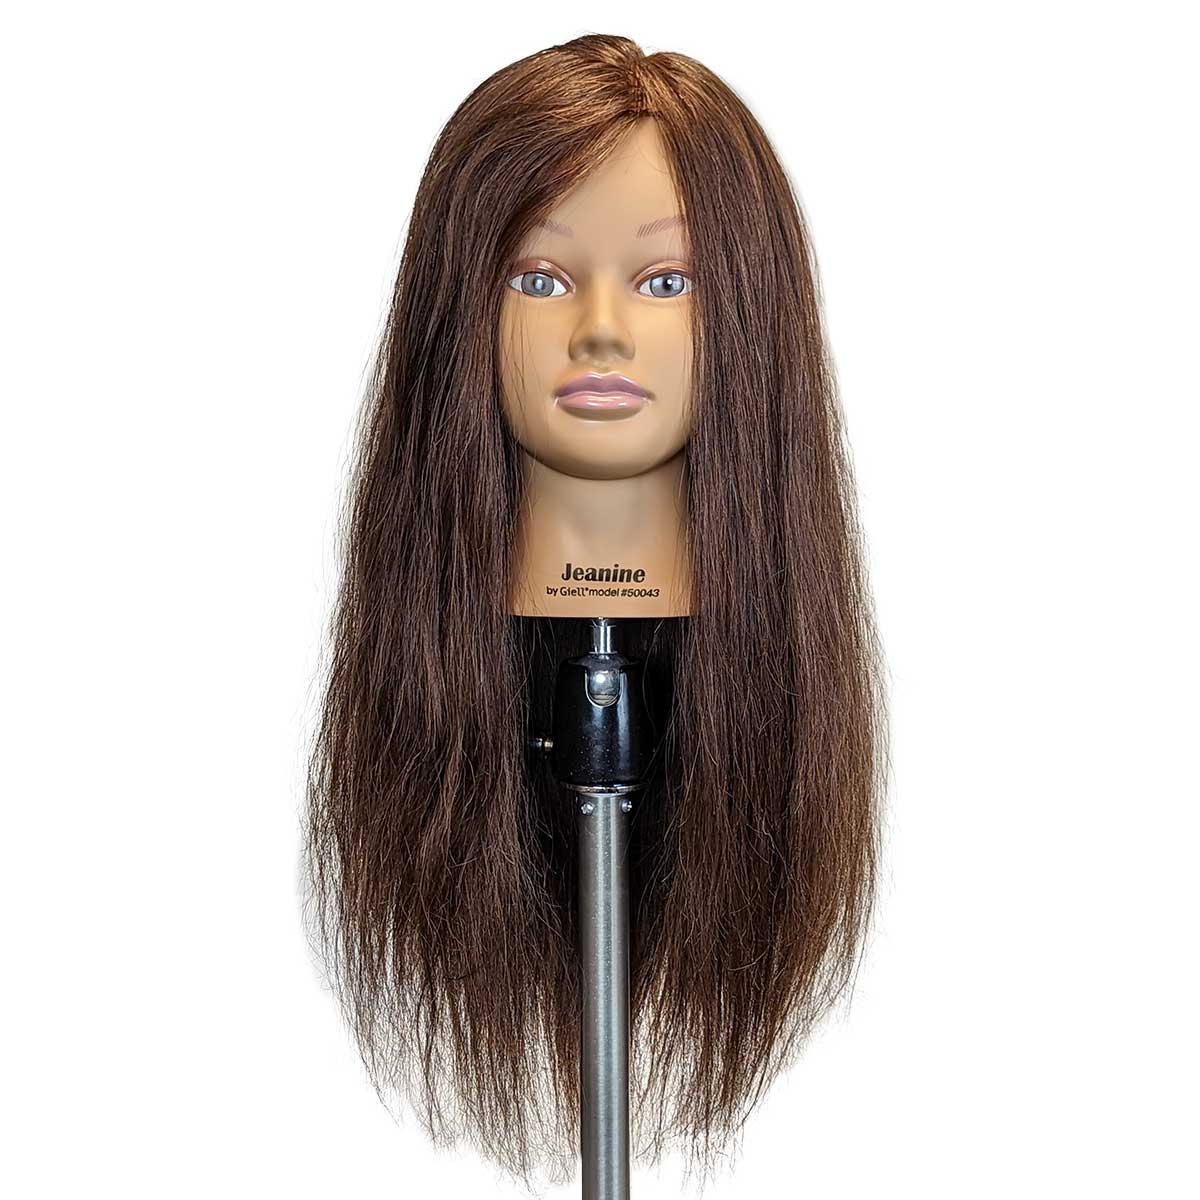 Jeanine Mannequin Head Haute Coiffure Collection Natural Hair Growth Extra Long Premium 100% Human Hair